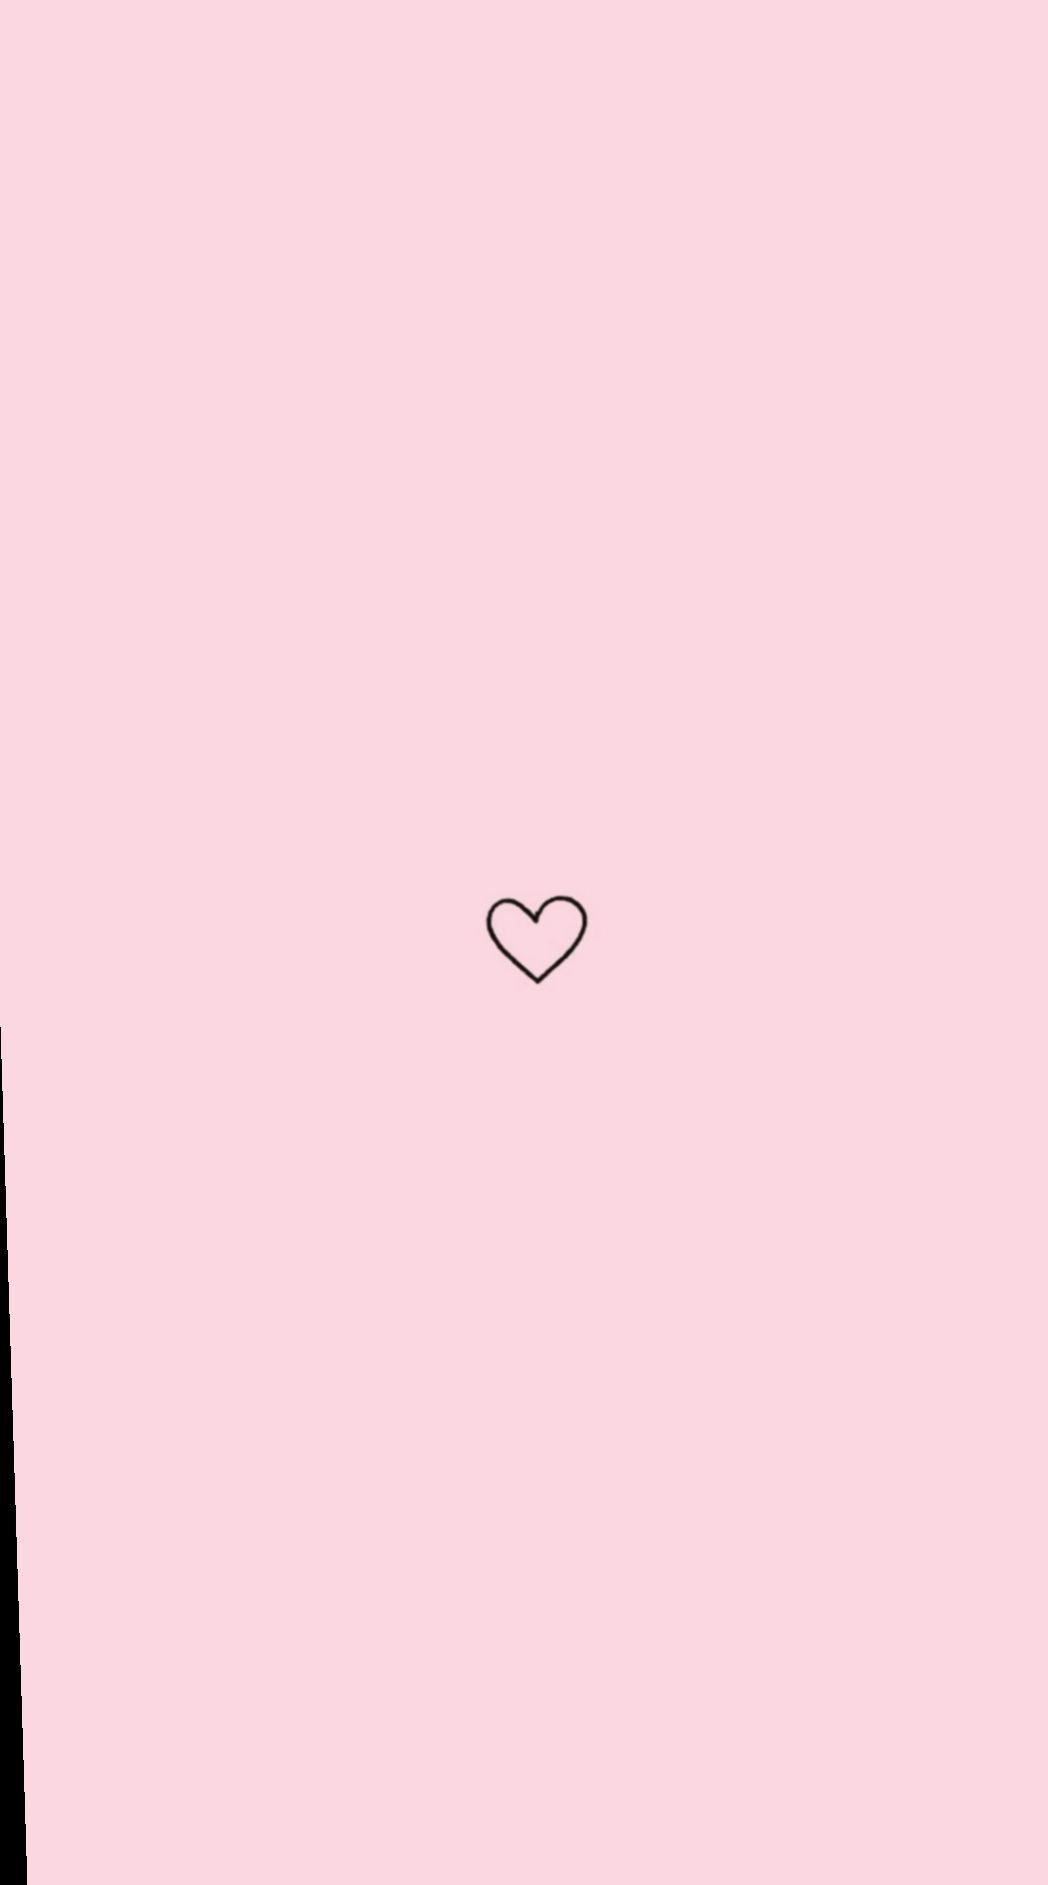 Pink Aesthetic Hearts Wallpapers - Wallpaper Cave